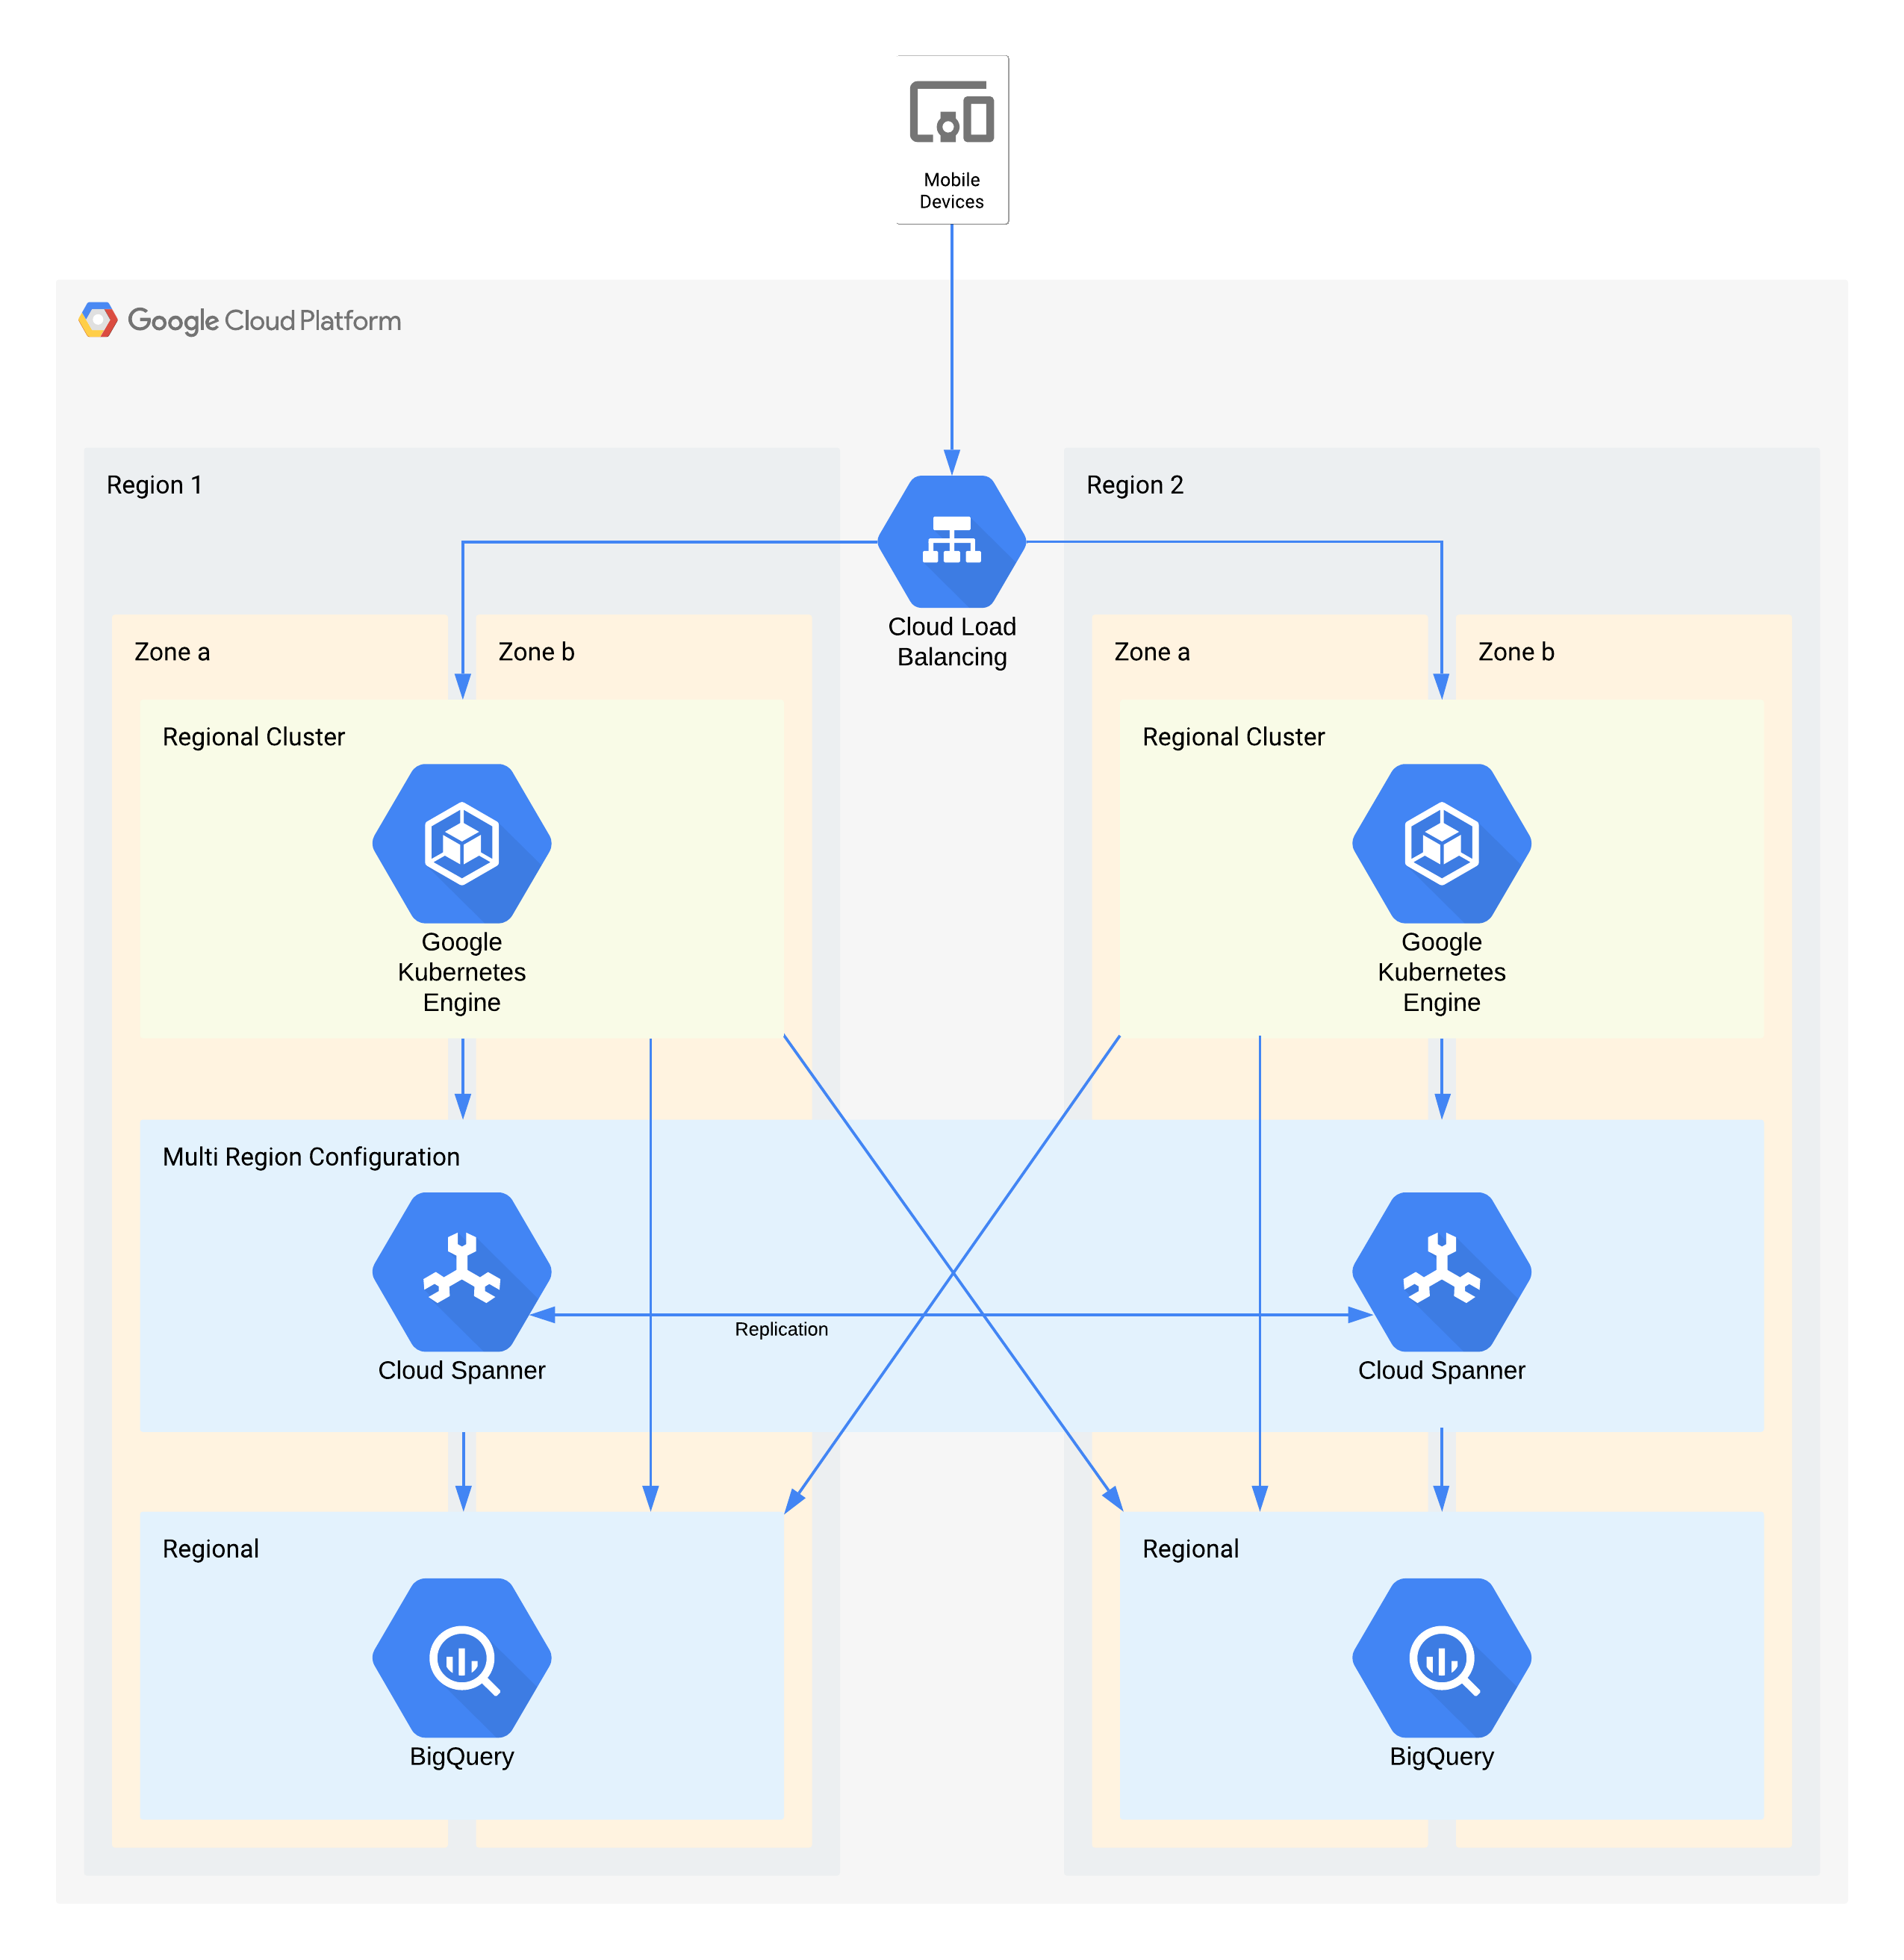 An example tier 1 architecture using Google Cloud products